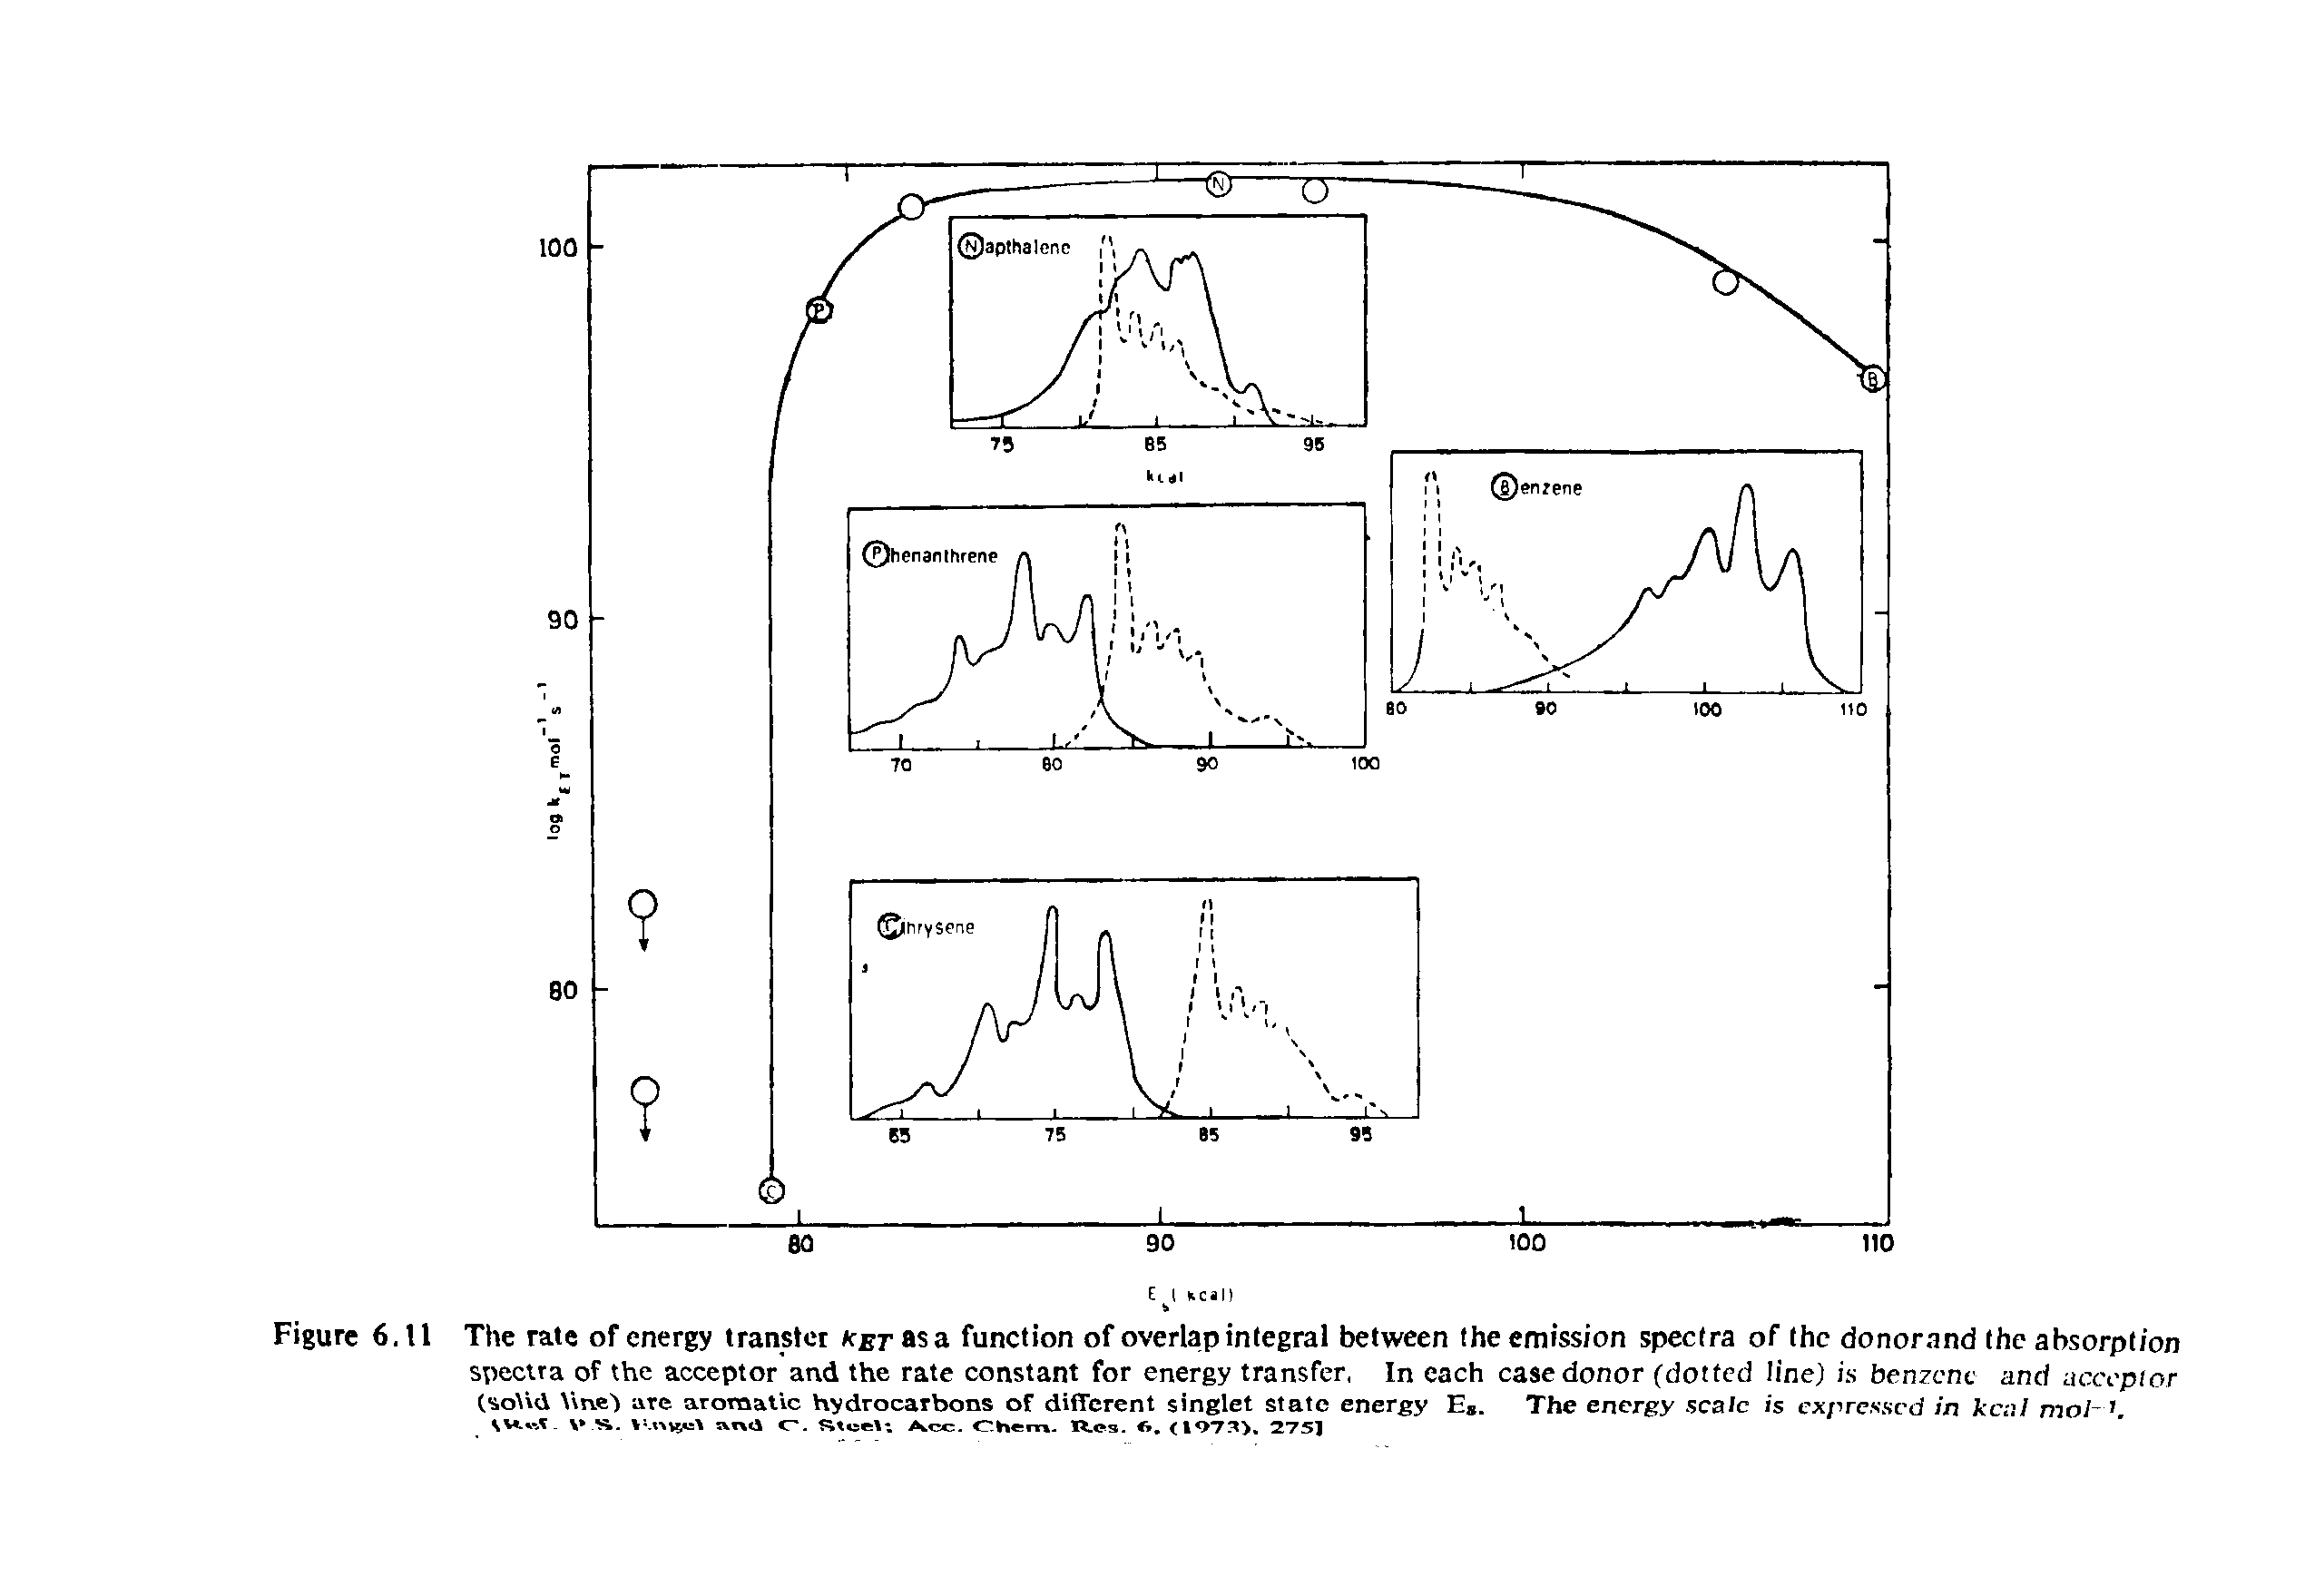 Figure 6.11 The rate of energy transfer et asa function of overlap integral between the emission spectra of the donorand the absorption spectra of the acceptor and the rate constant for energy transfer, In each case donor (dotted line) is benzene and acceptor (solid Vine") are aromatic hydrocarbons of different singlet state energy E . The energy scale is expressed in kcc.l mol-...